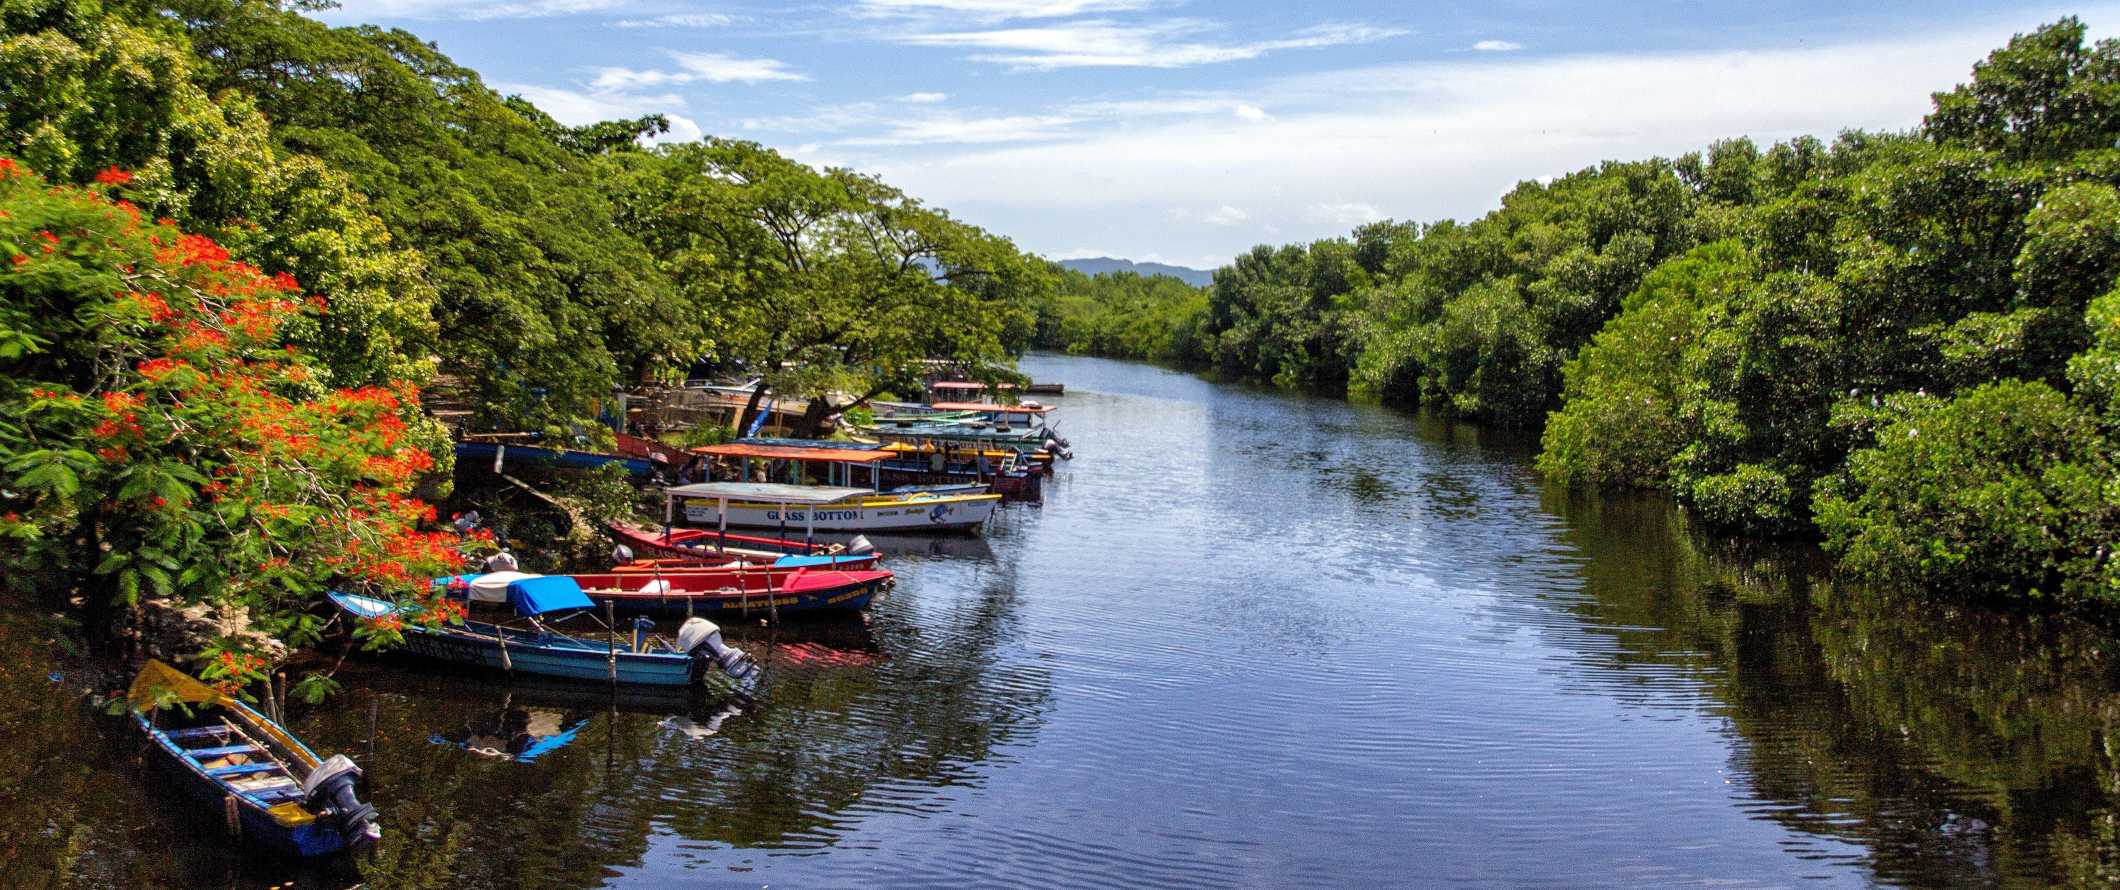 Boats parked along a waterway surrounded by greenery in Jamaica